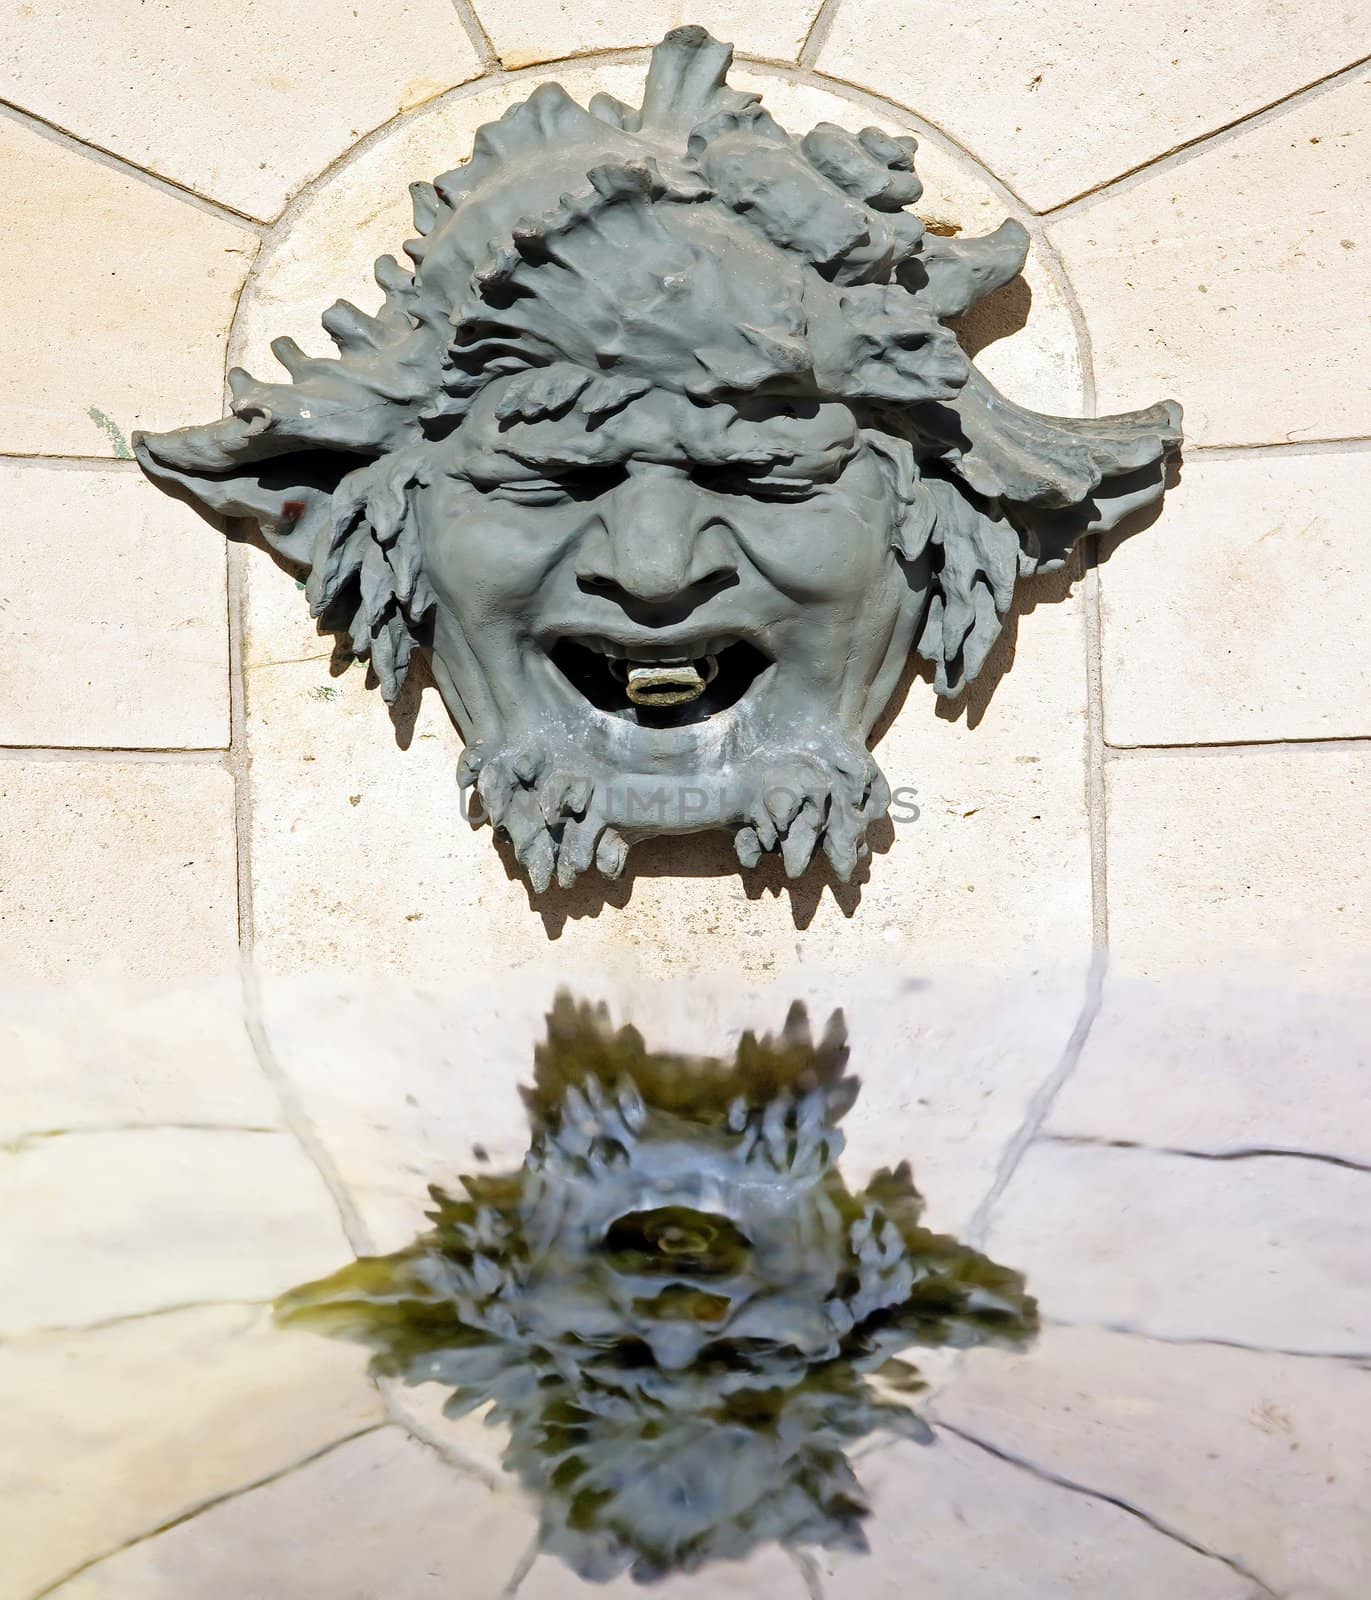 grotesque, mask, and its reflection in water by neko92vl